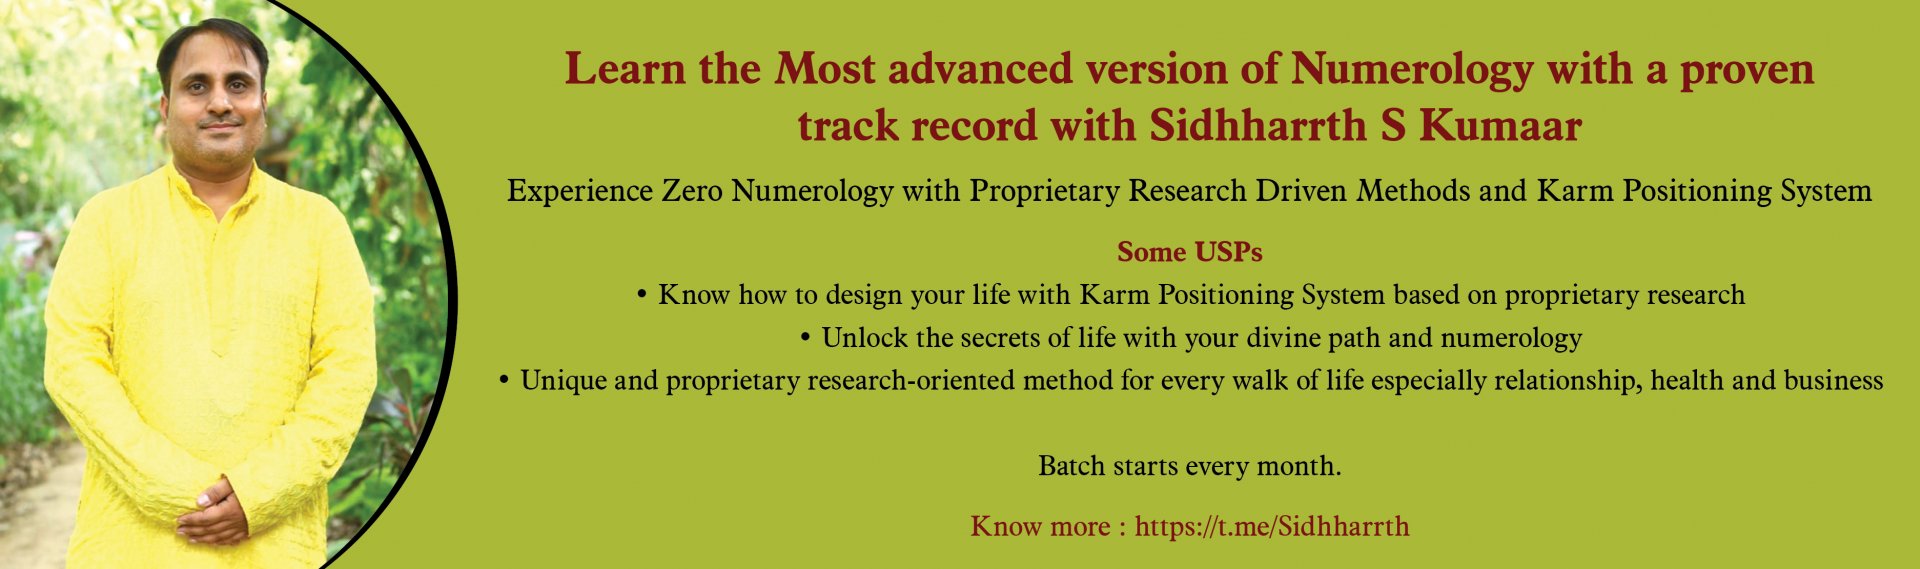 Learn the Most advanced version of Numerology with a proven track record with Sidhharrth S Kumaar 